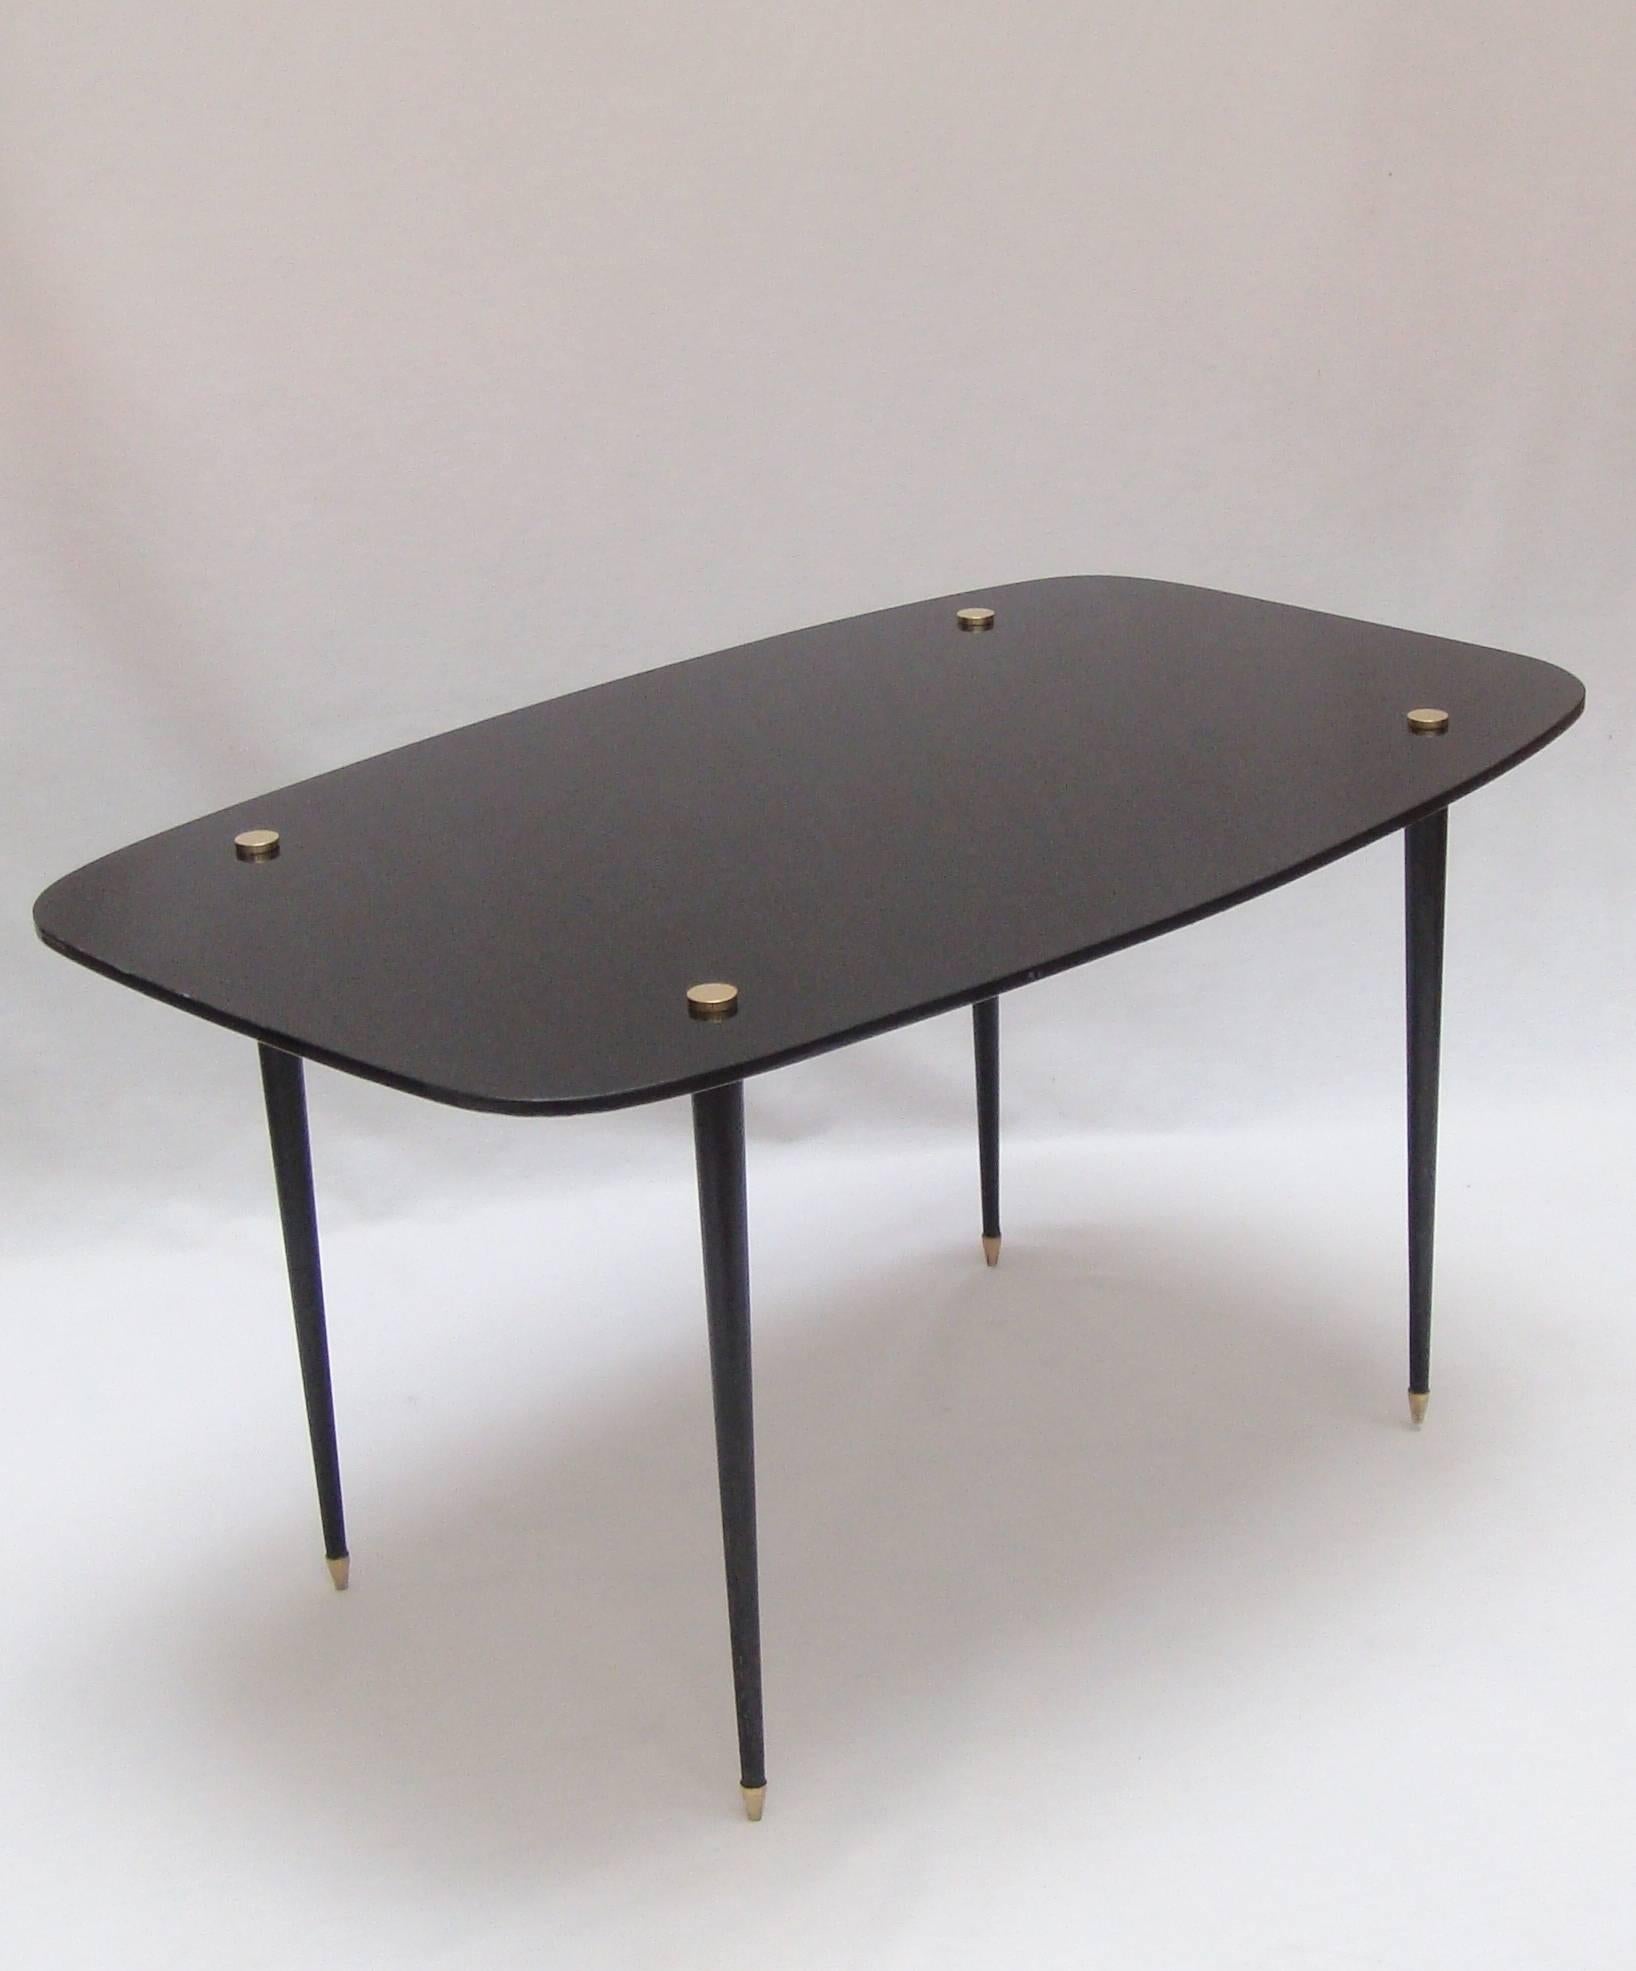 A black glass side table with black lacquered metal legs and brass detail.
 